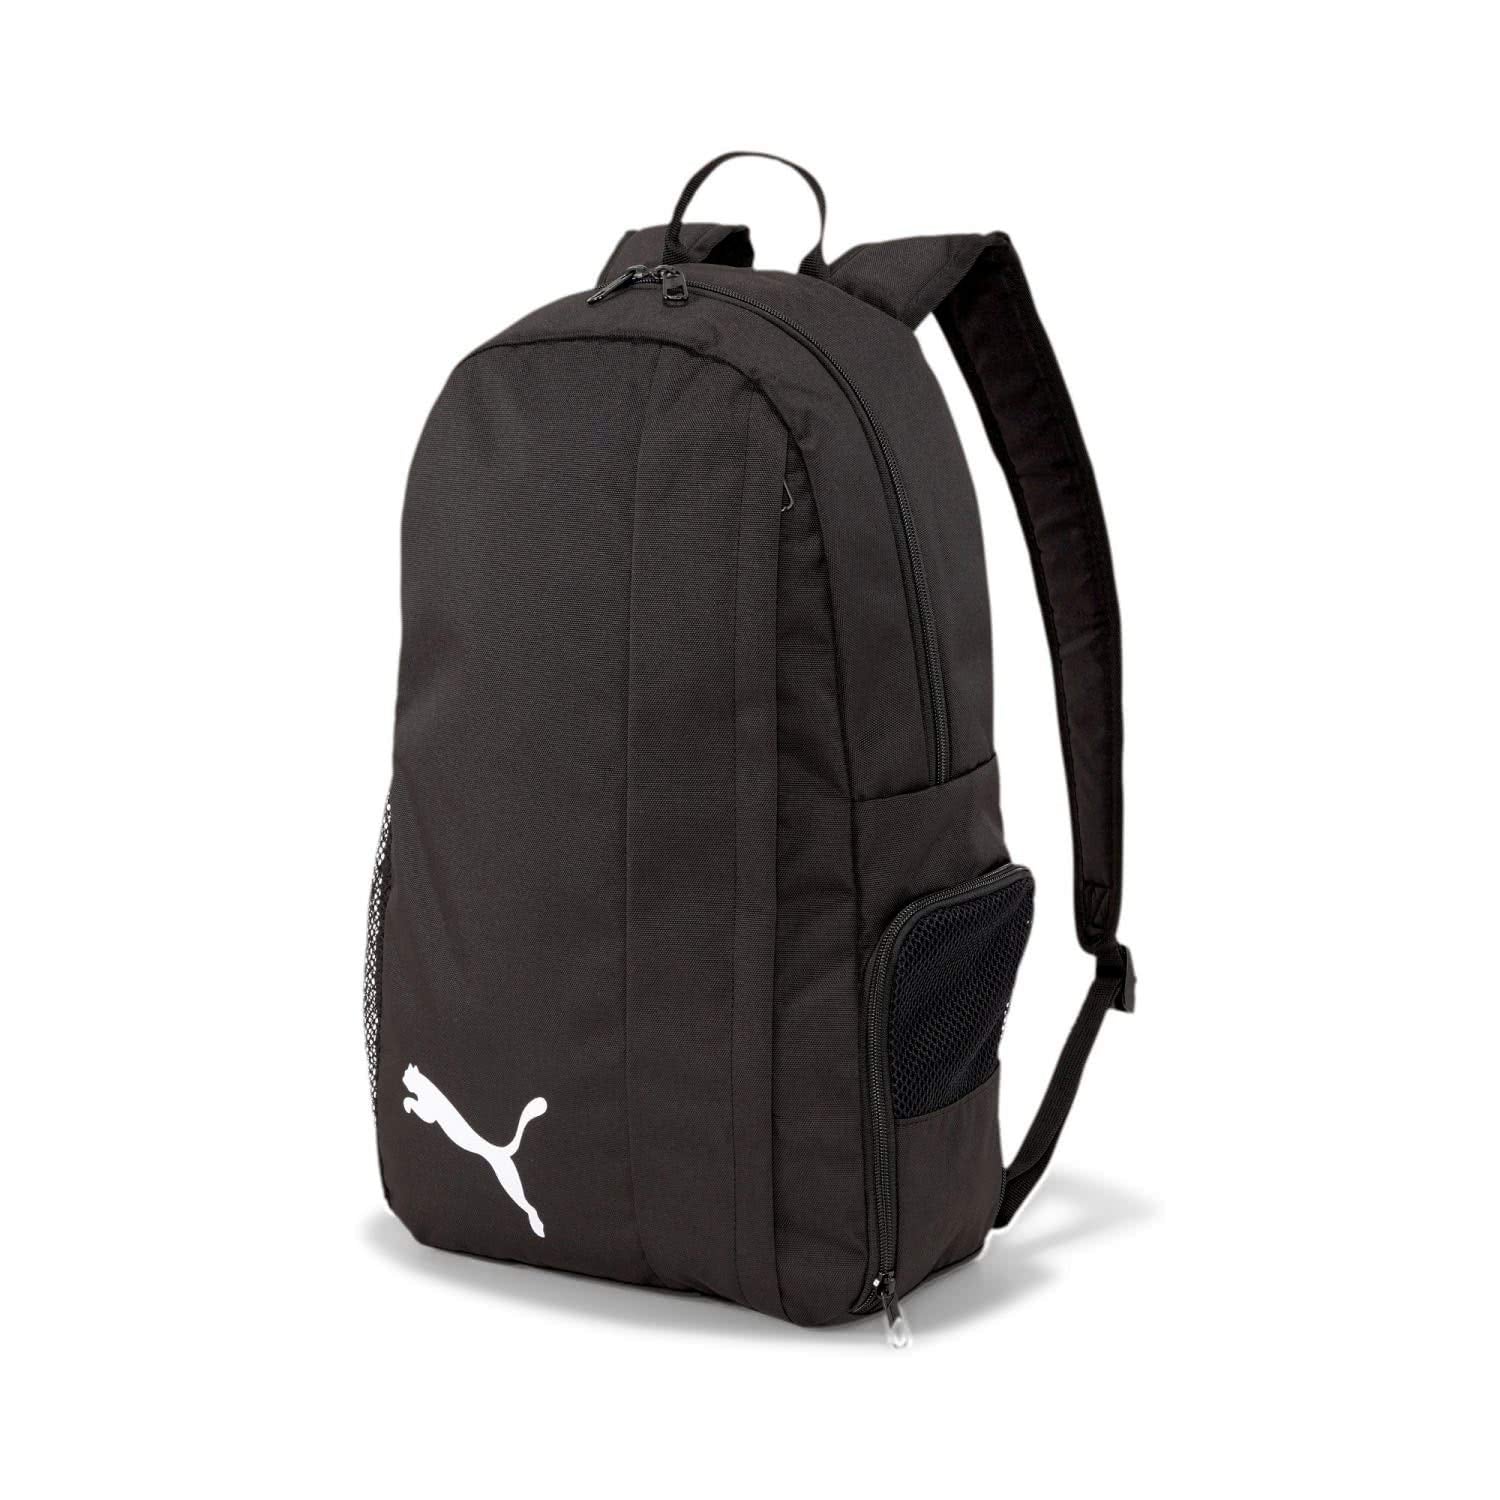 PUMA teamGOAL 23 Backpack with Bottom Compartment